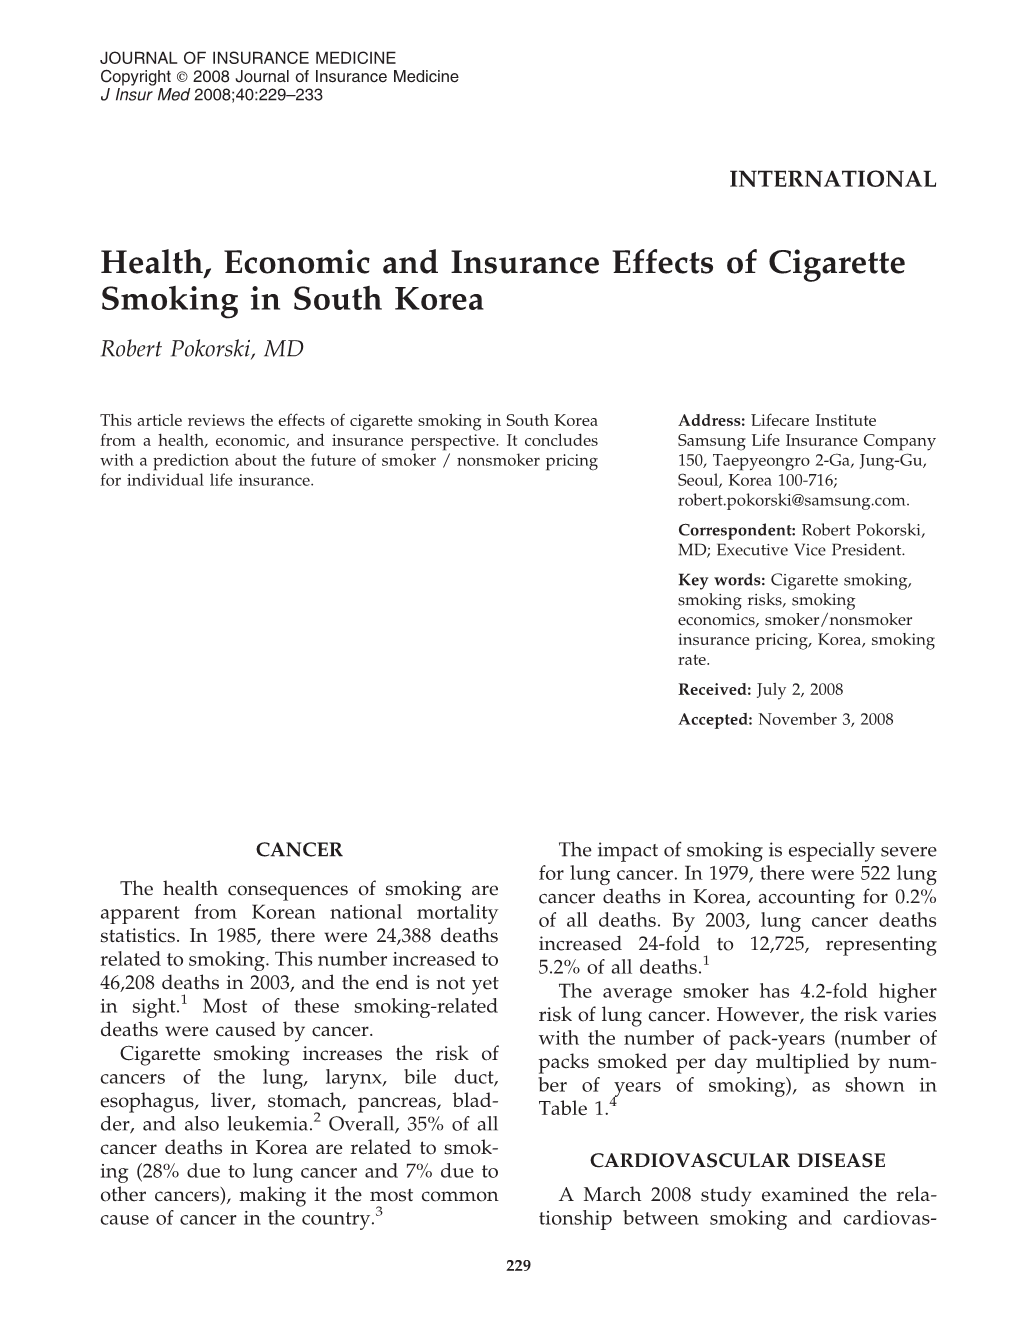 Health, Economic and Insurance Effects of Cigarette Smoking in South Korea Robert Pokorski, MD